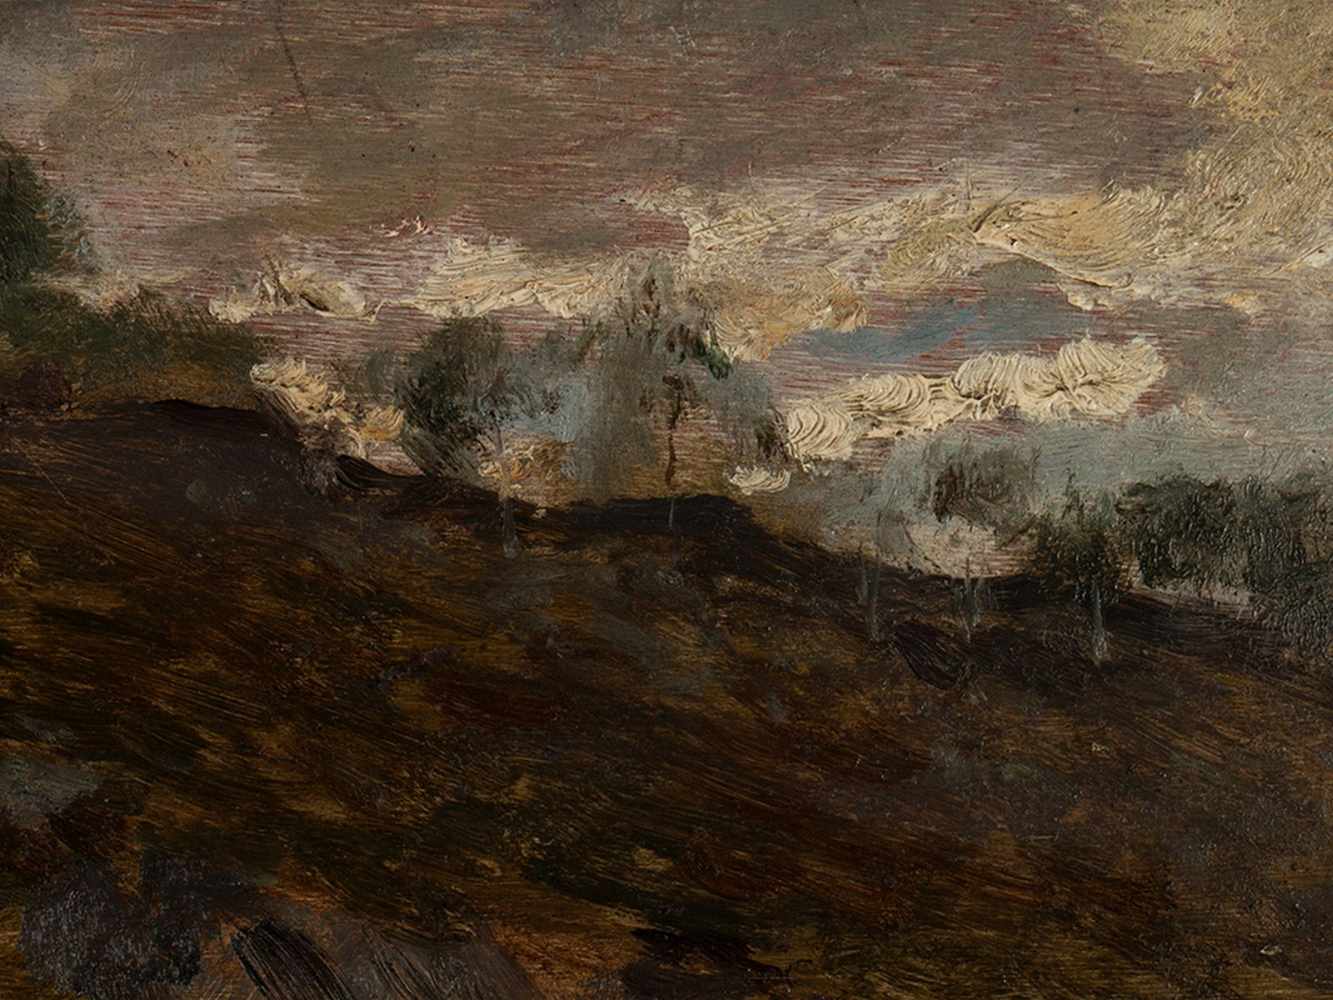 Jules-Jean Ferry, Oil Painting 'Mountain Creek', c. 1890 - Image 6 of 8